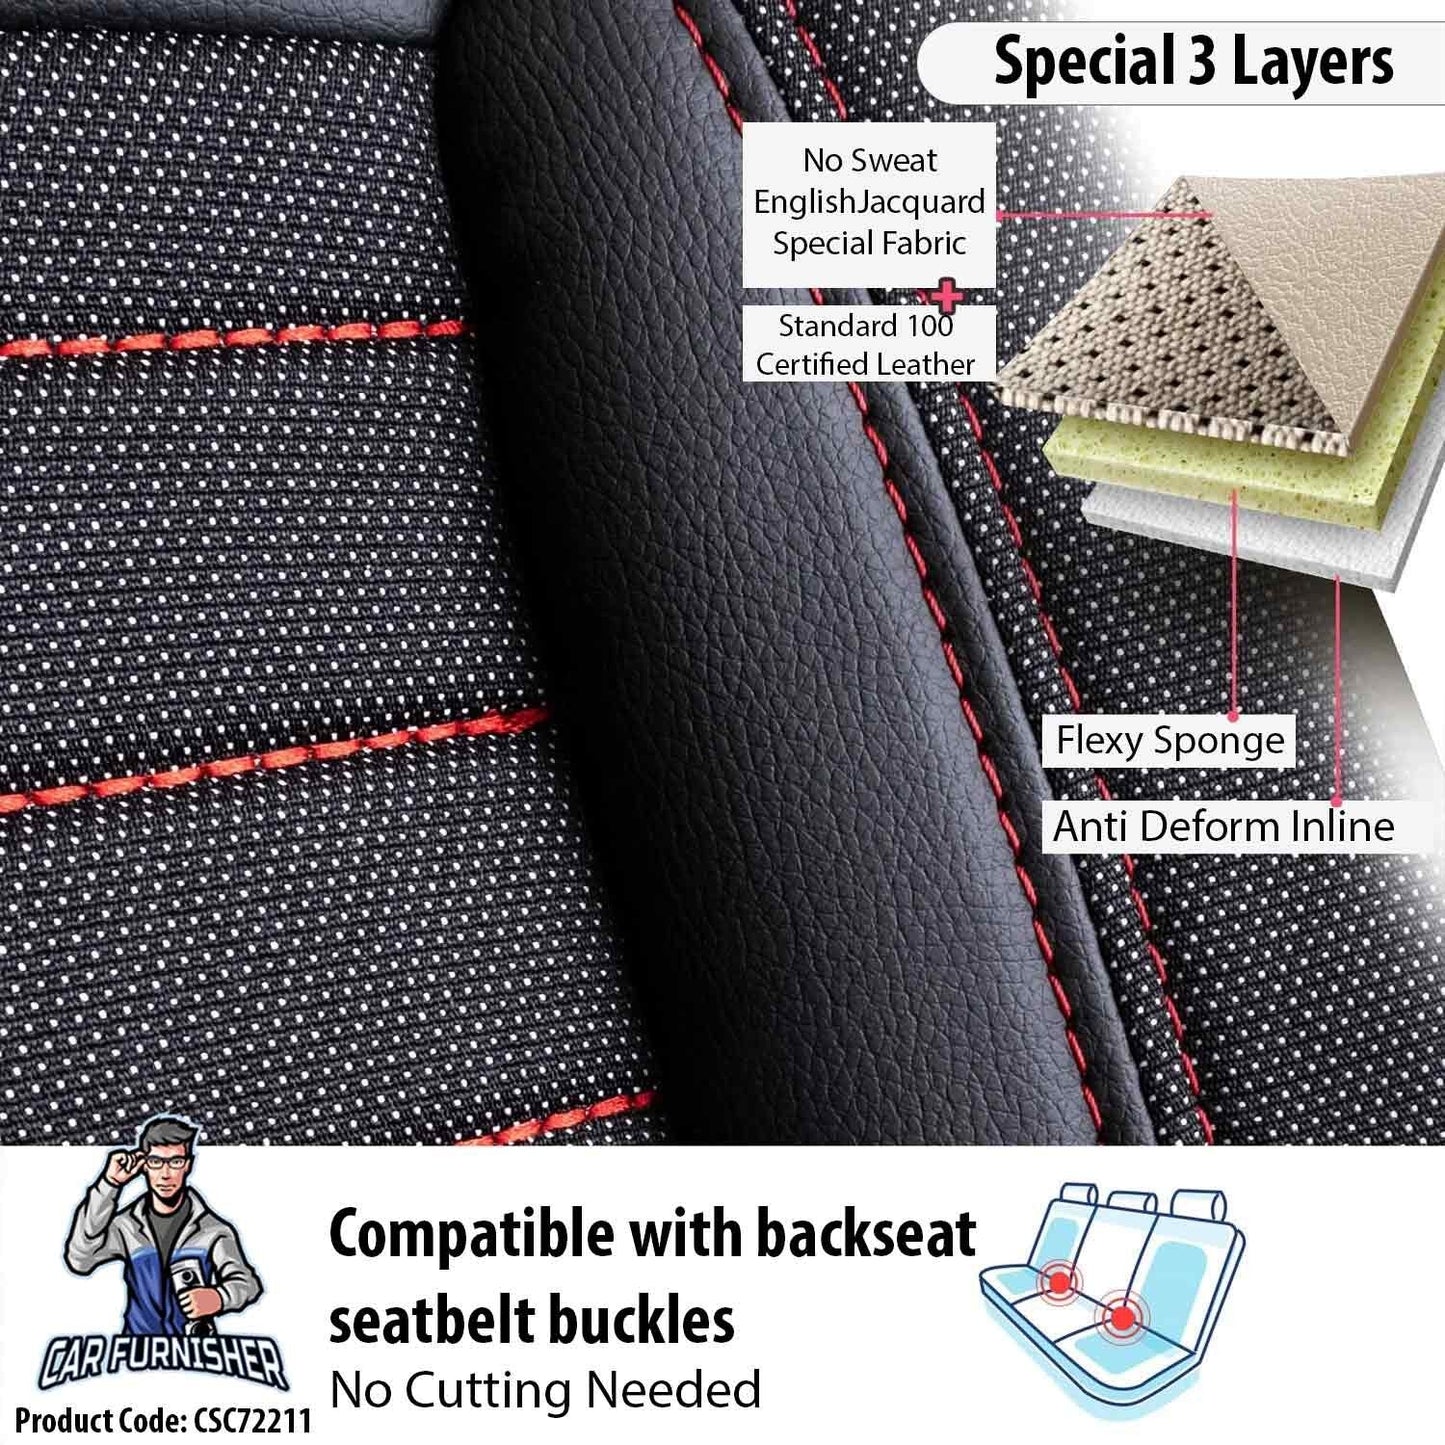 Mercedes 190 Seat Covers London Design Dark Red 5 Seats + Headrests (Full Set) Leather & Jacquard Fabric